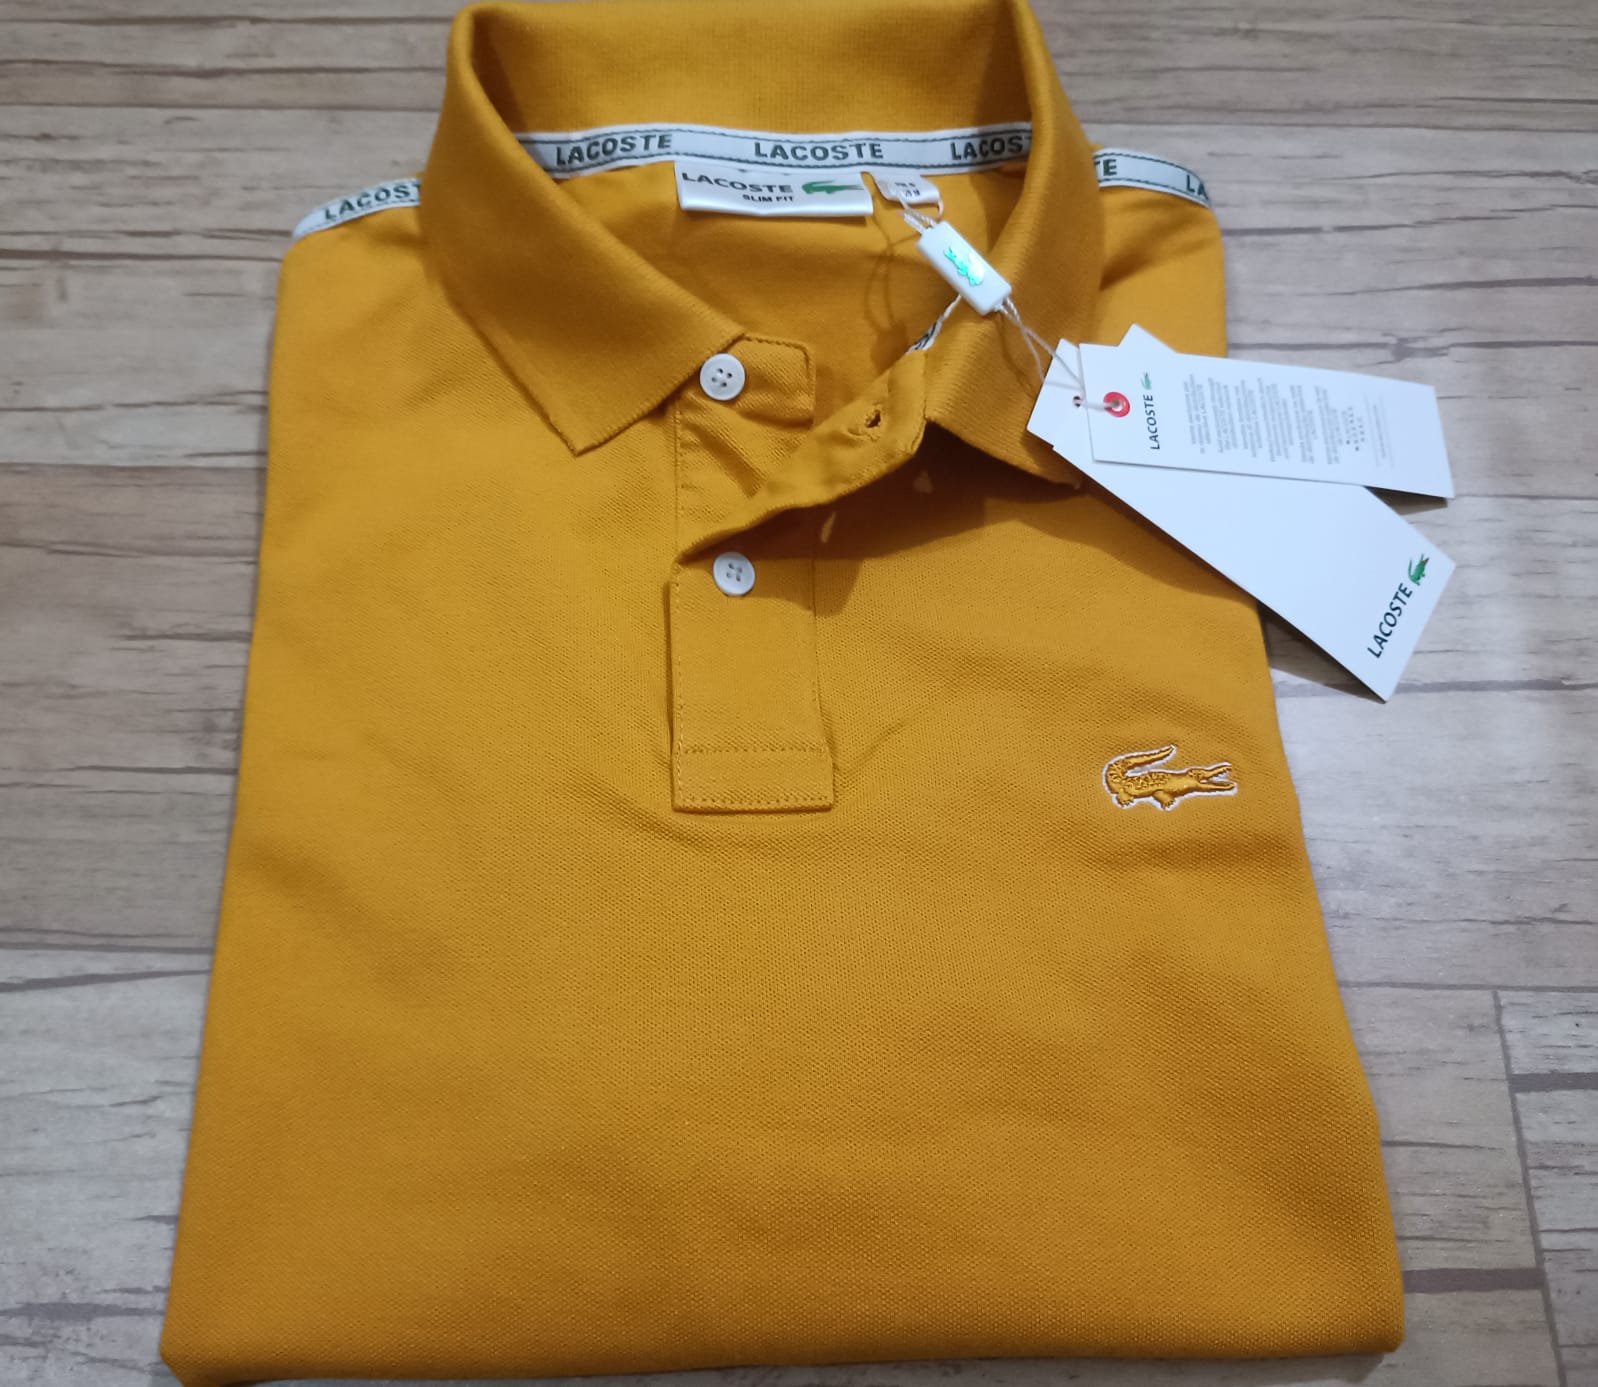 Imported Super Premium Cotton Polo Shirt For Men (ZAYSIPS10) - Yellow